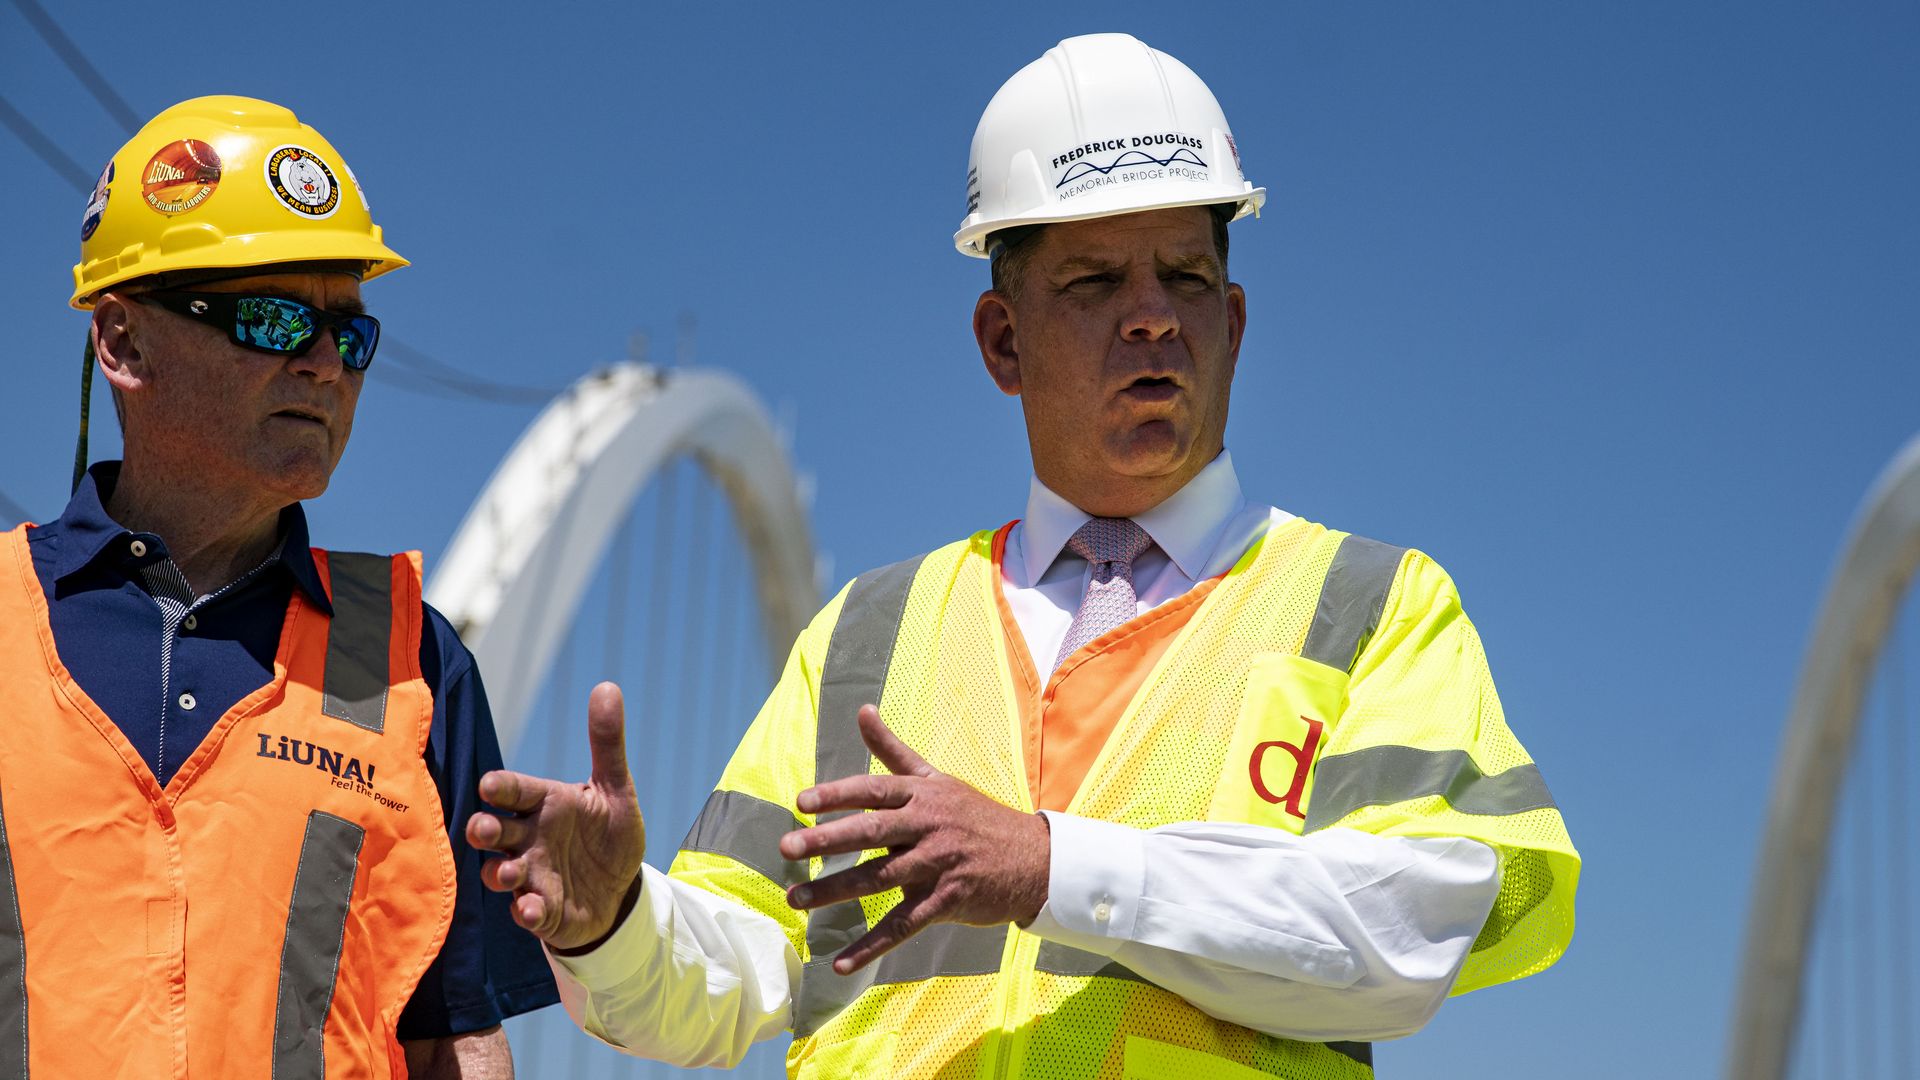 Labor Secretary Marty Walsh is seen in a hardhat on the site of a bridge construction project in Washington, D.C.